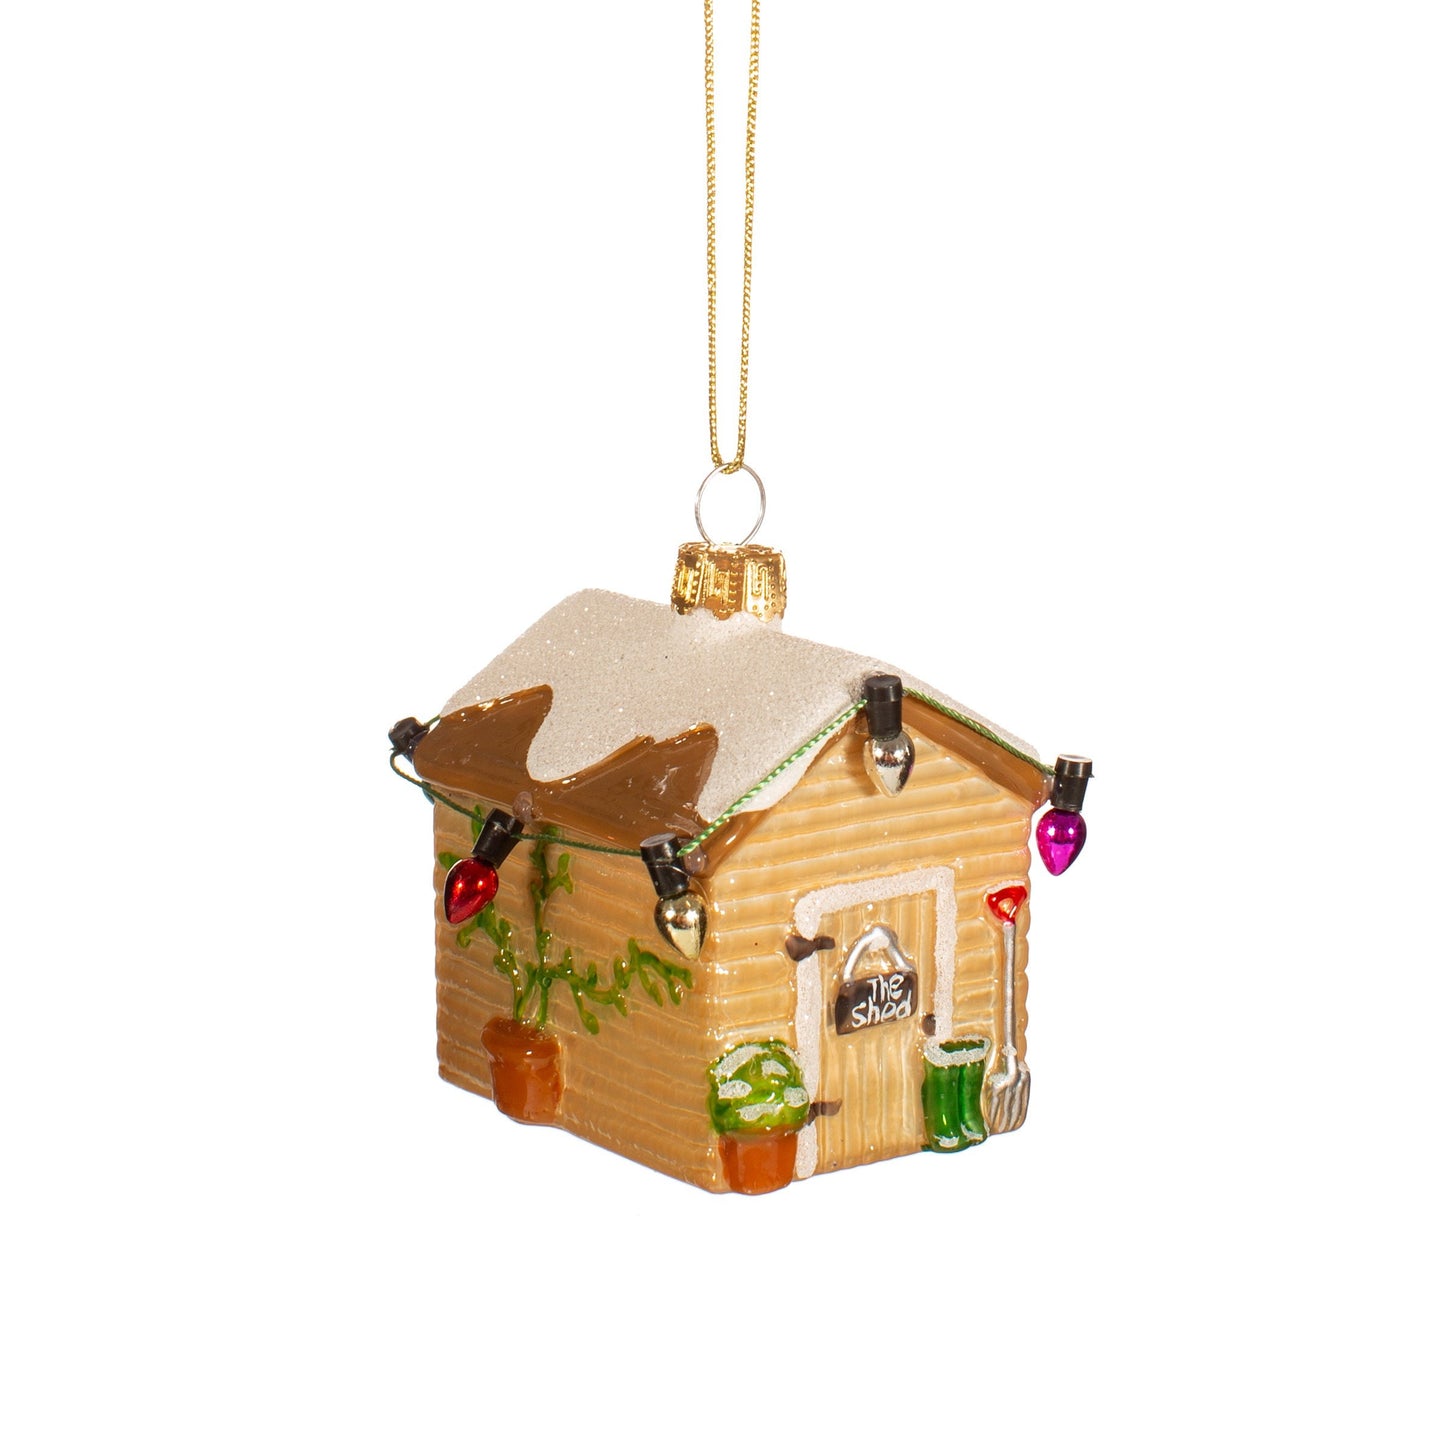 Mini Garden Shed Shaped Bauble Christmas Tree Decoration